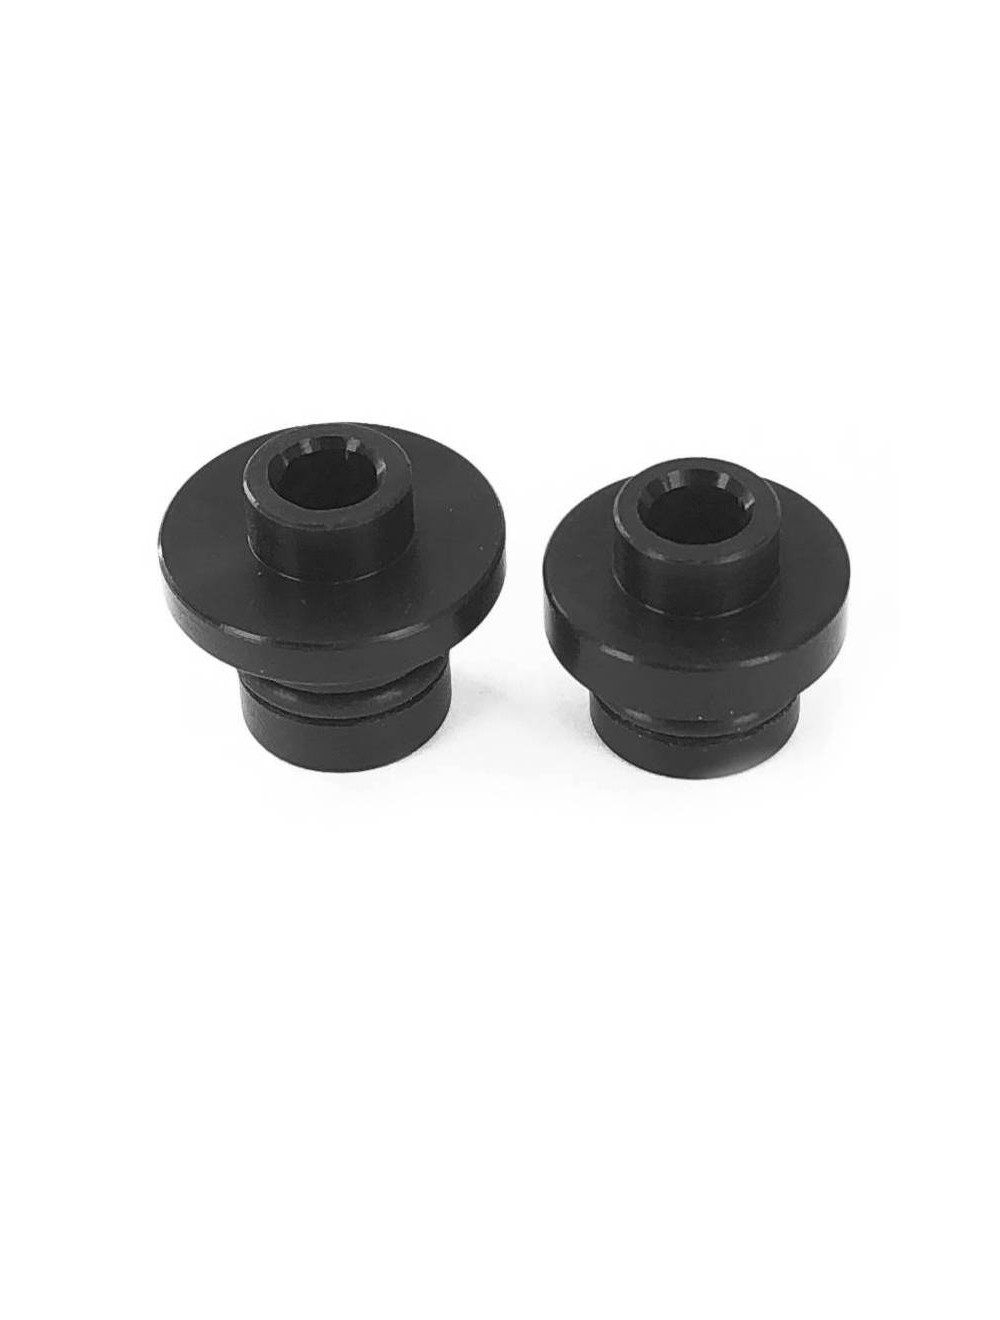 135mm Slotted Dropout Rear Adapters for V3